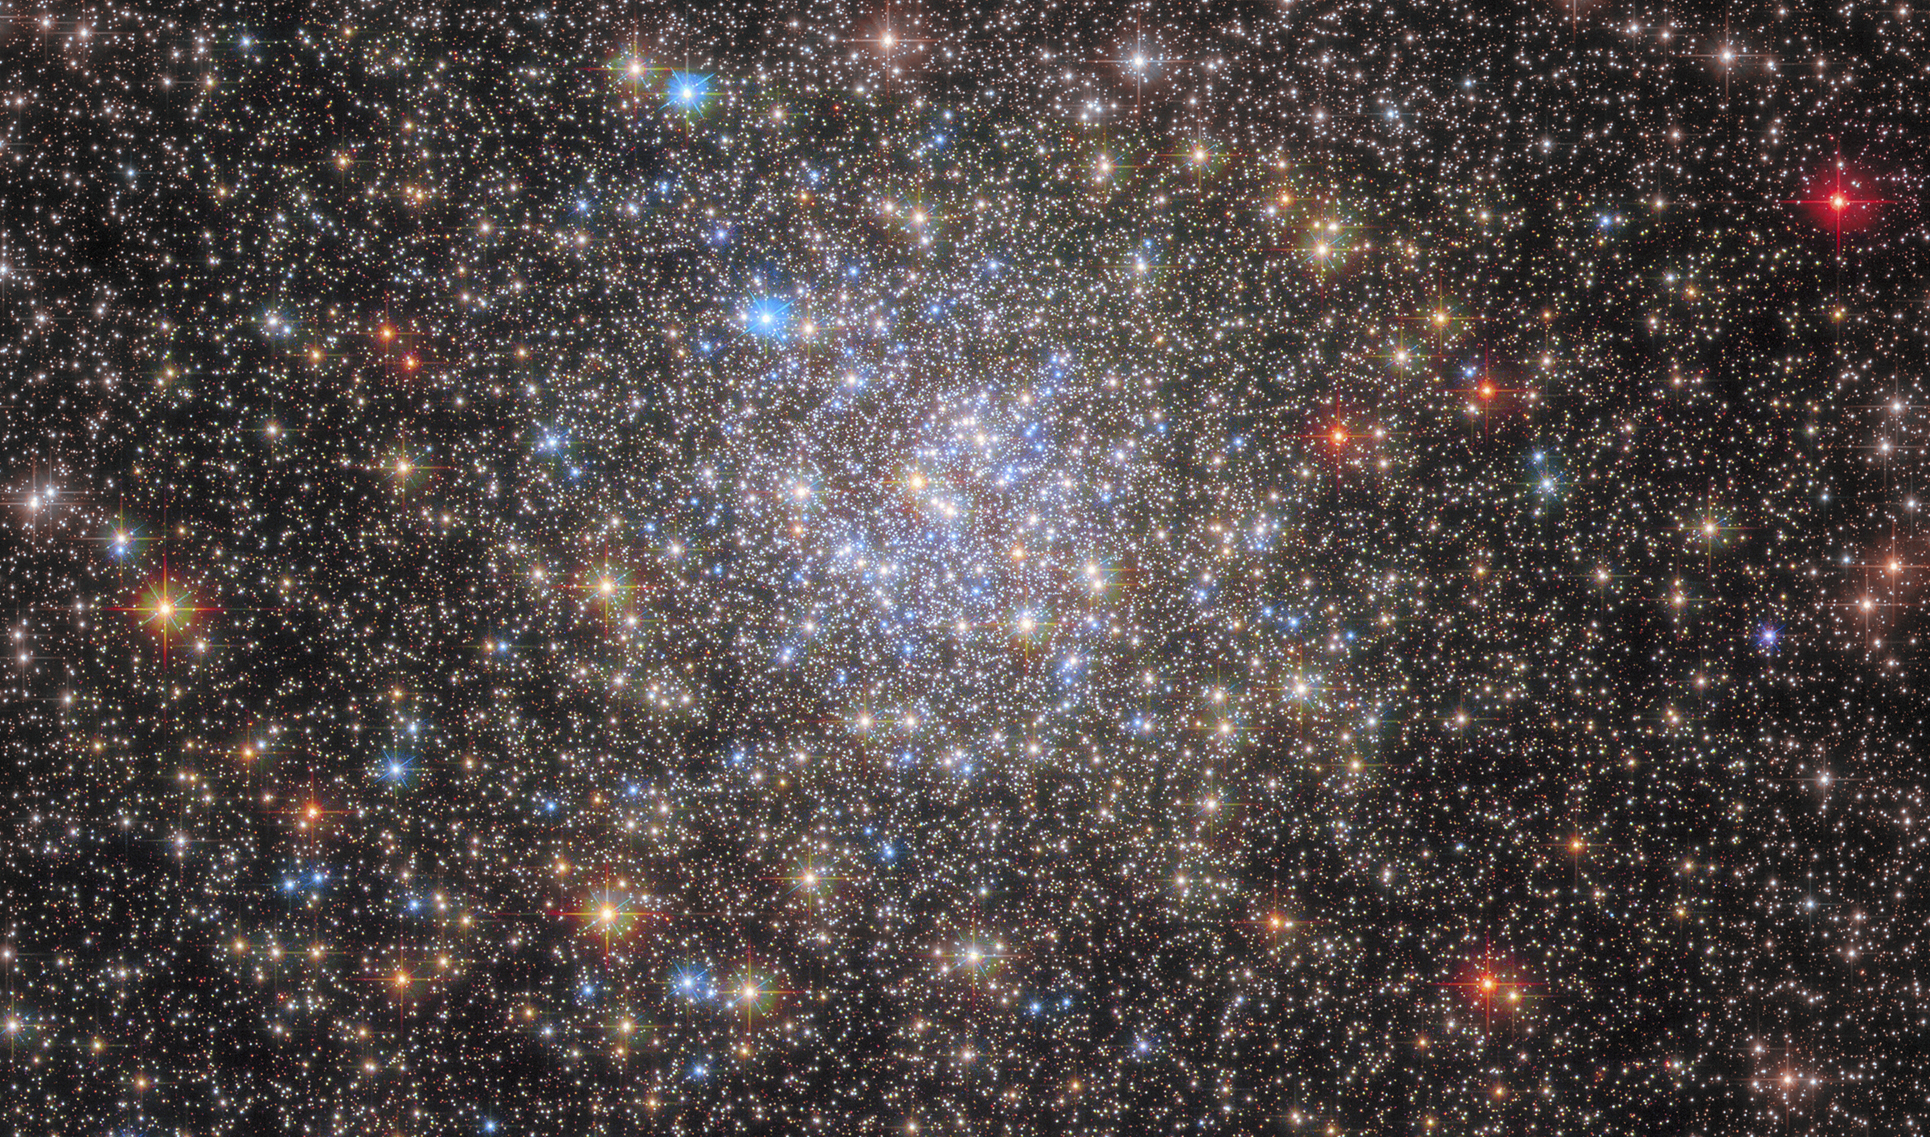 A massive cluster of blue, red, yellow, and white stars.